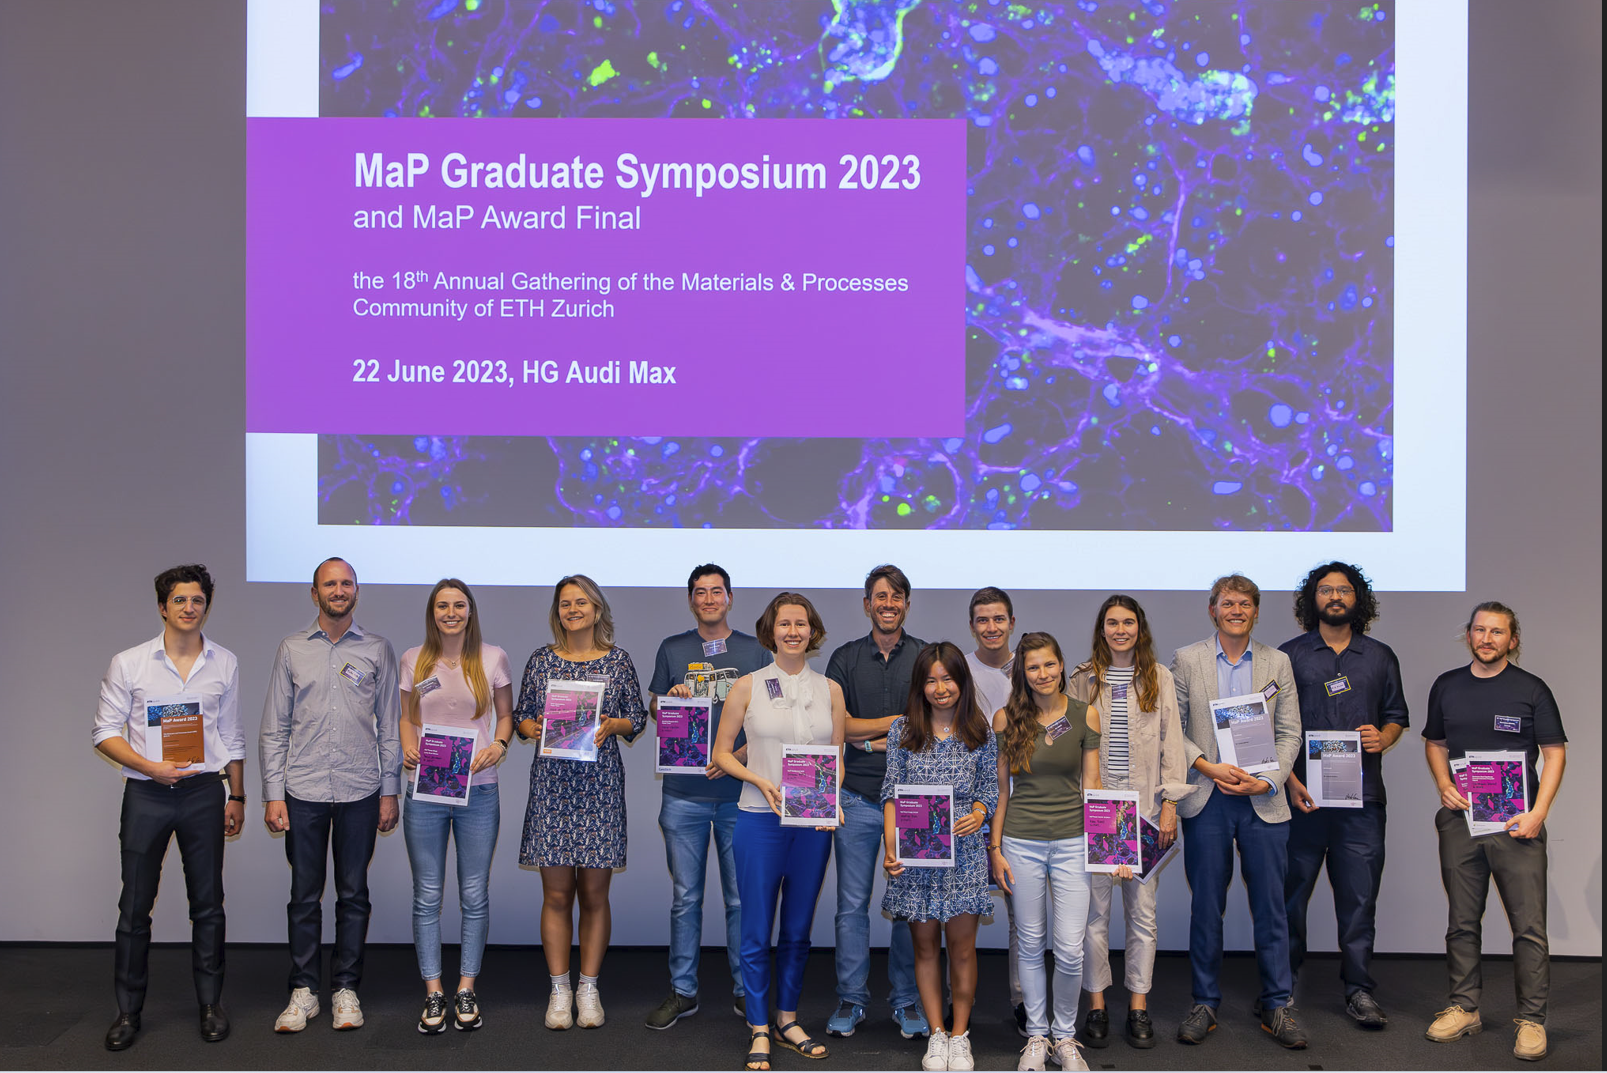 Group of MaP awardees in front of the powerpoint slide showing the official MaP Graduate Symposium banner